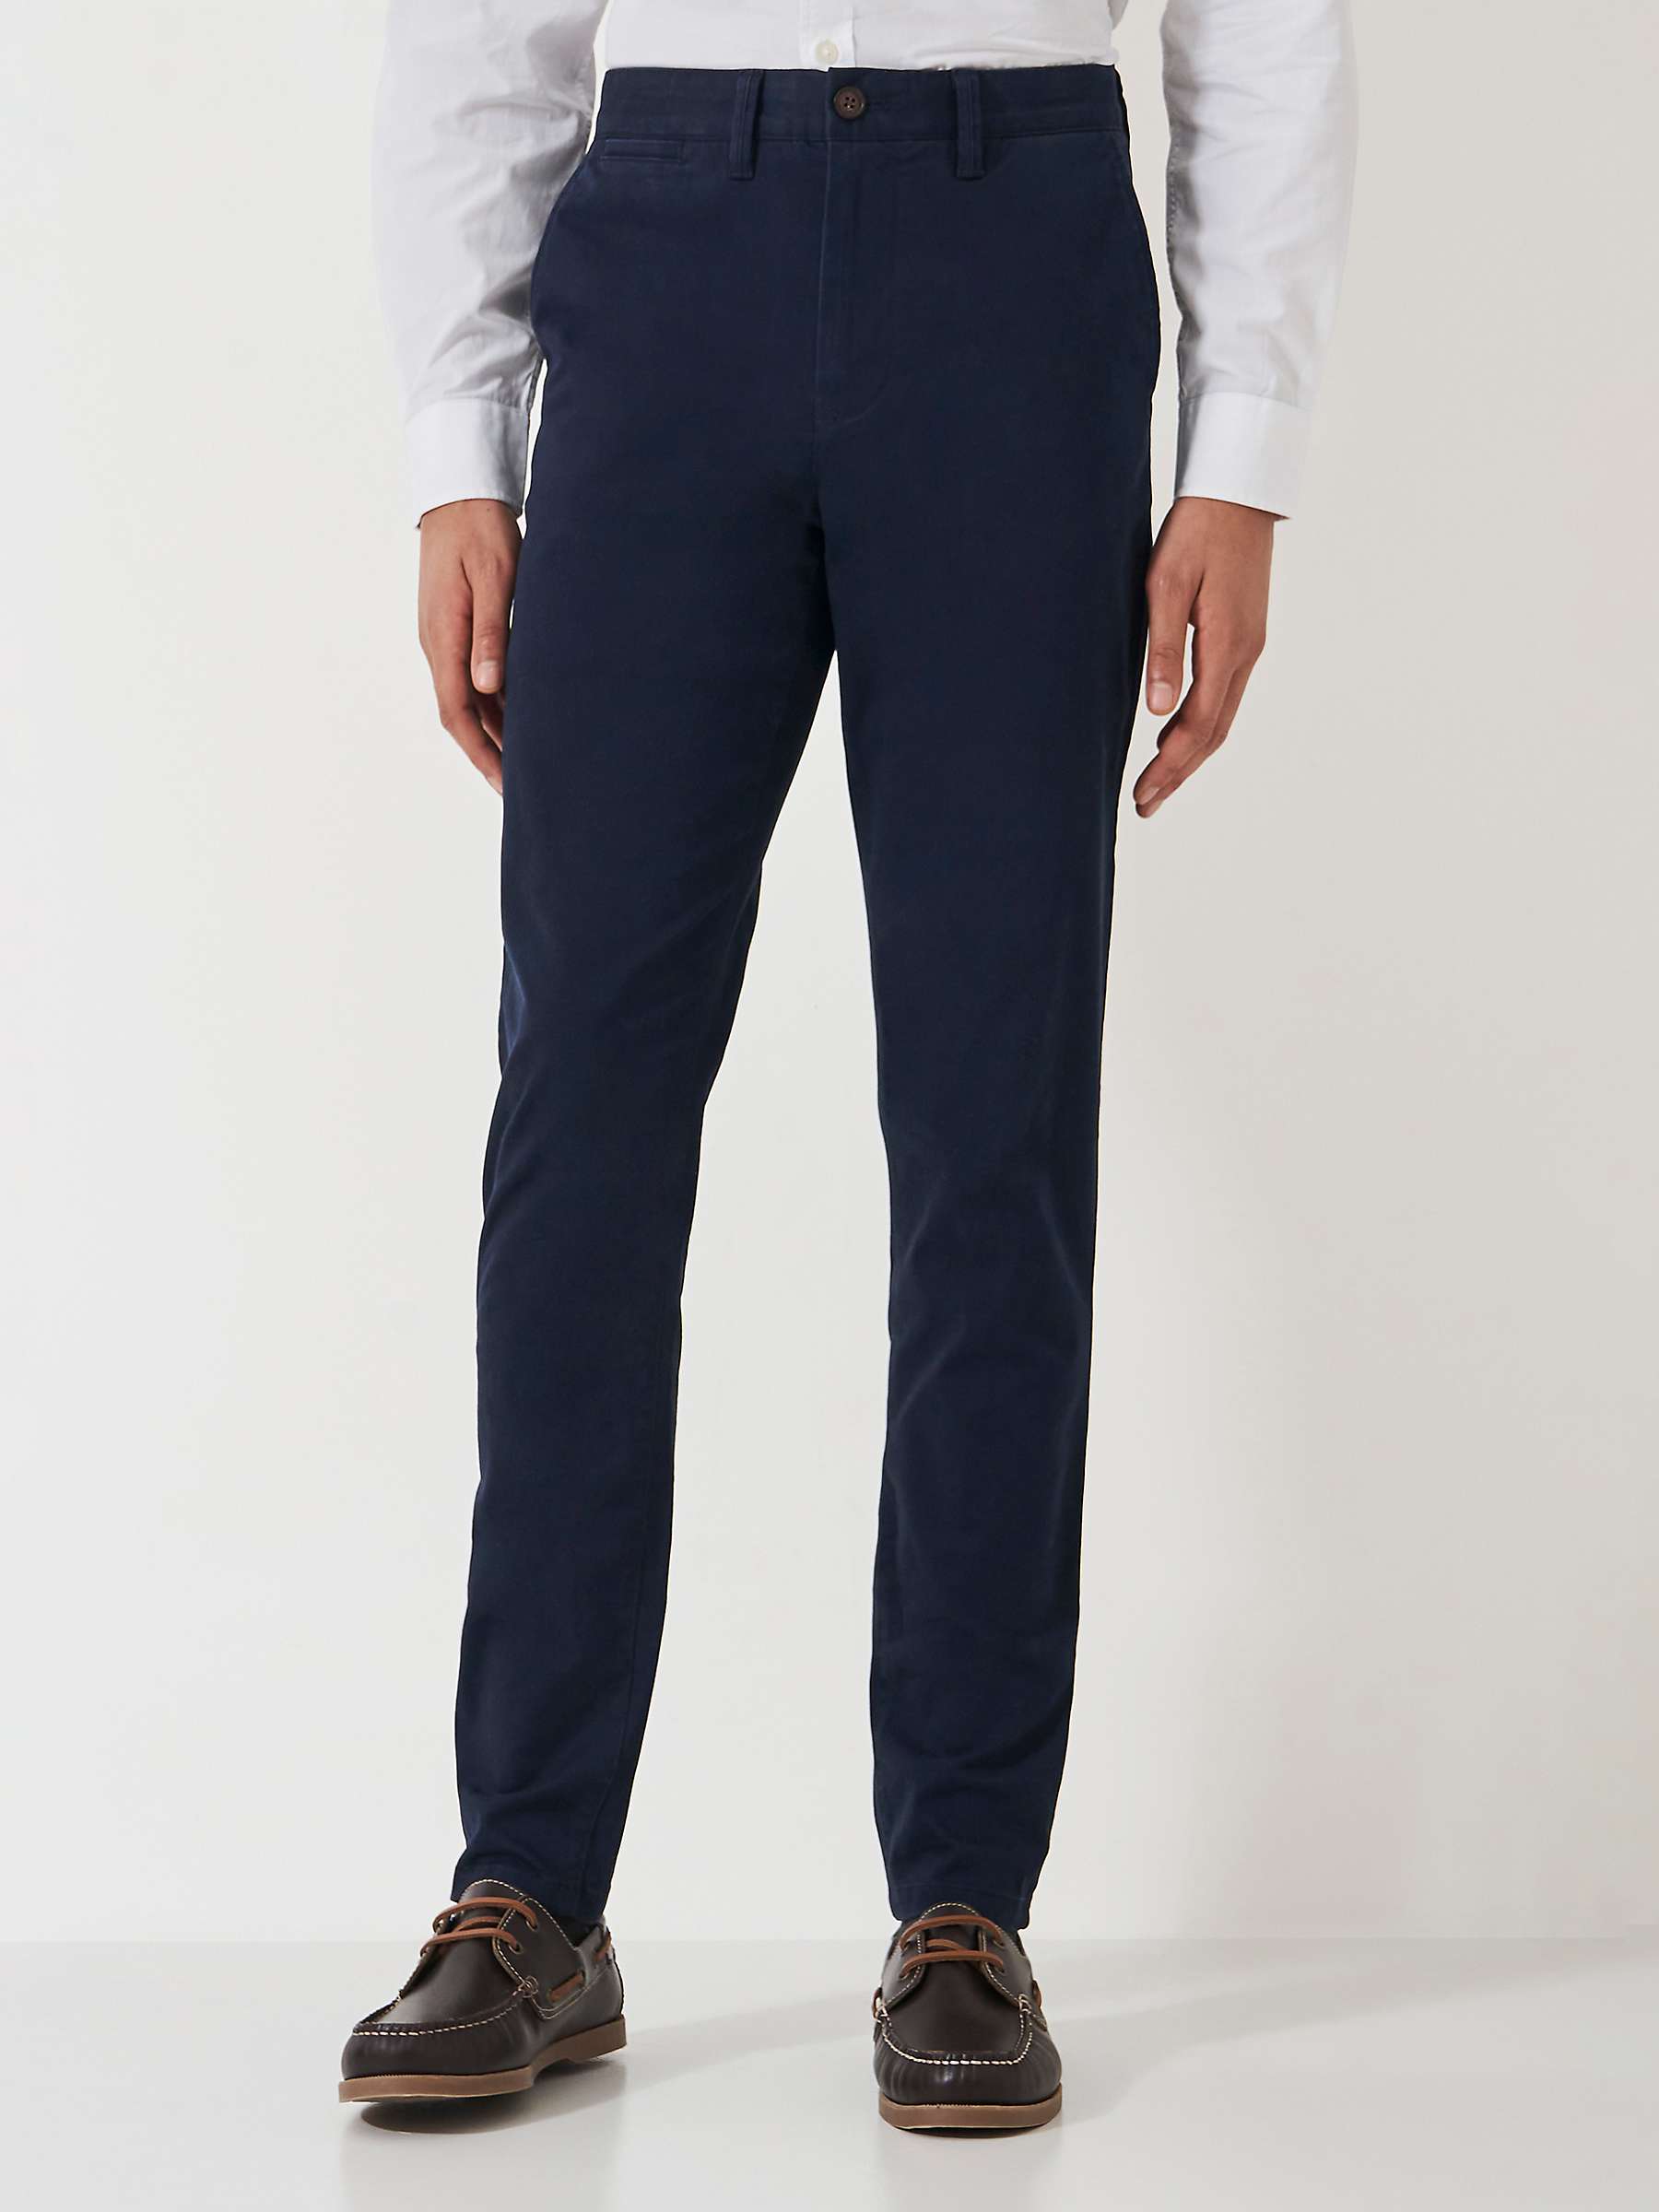 Buy Crew Clothing Slim Fit Chino Trousers, Dark Blue Online at johnlewis.com